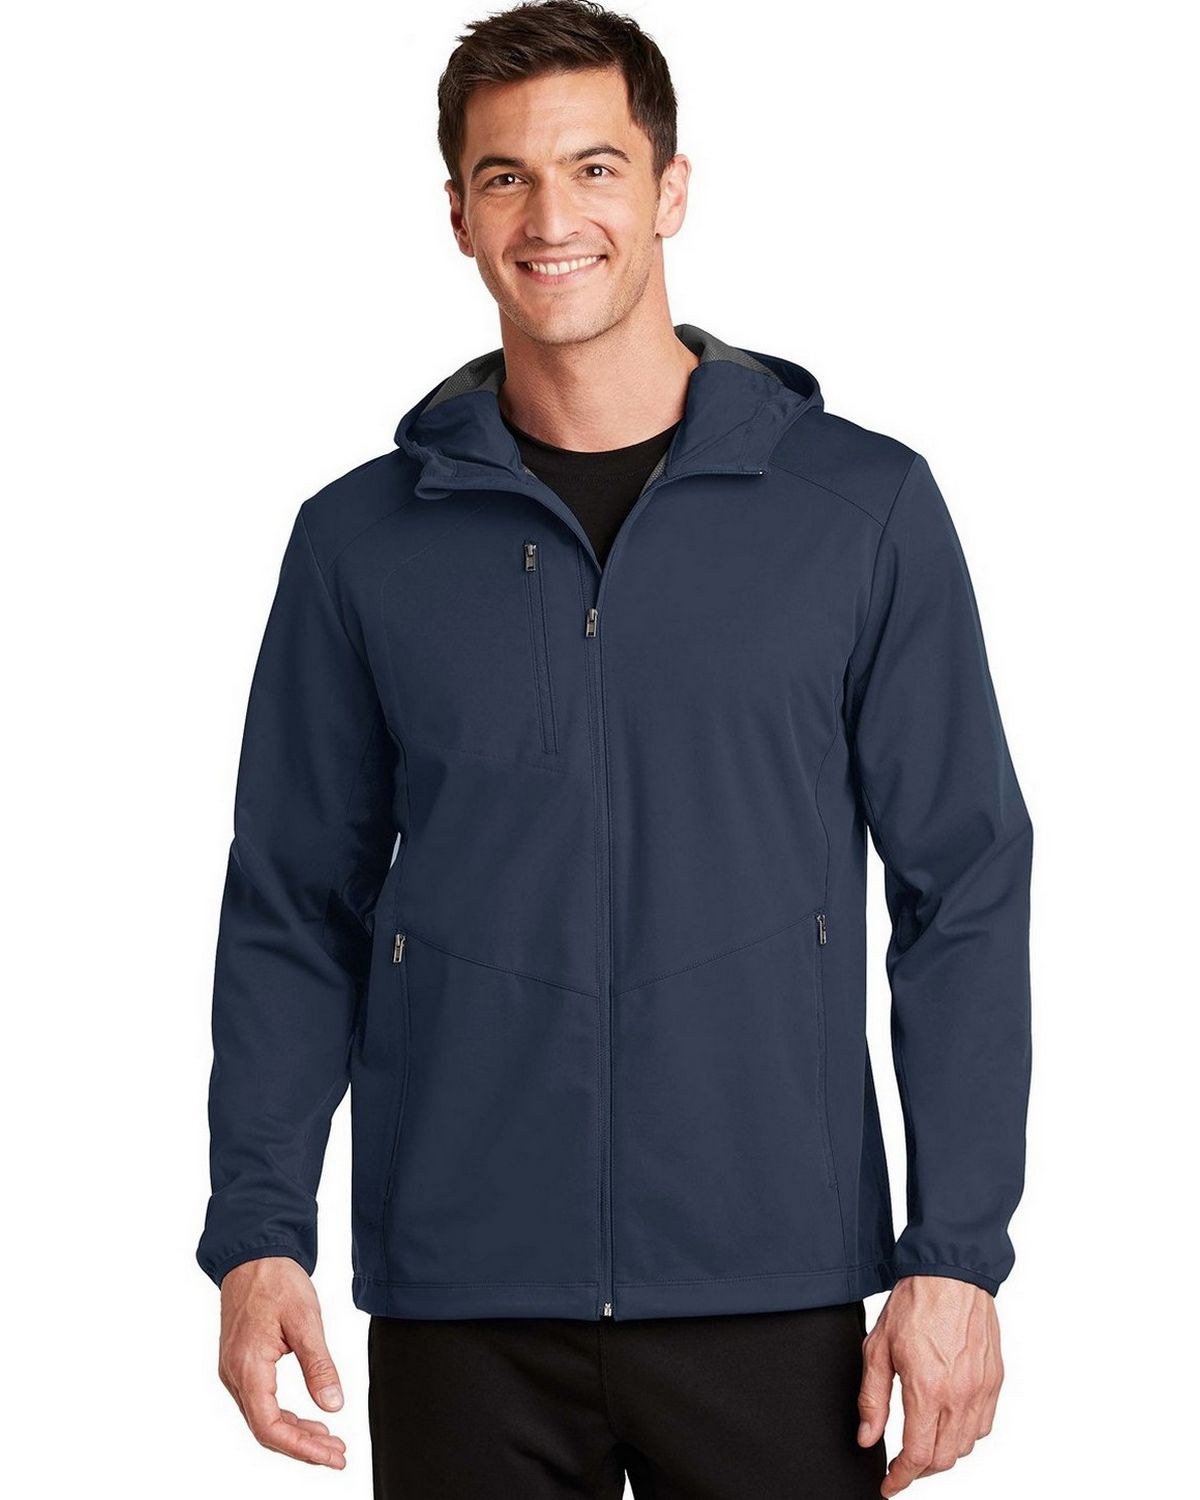 Port Authority J719 Active Hooded Jacket - ApparelnBags.com